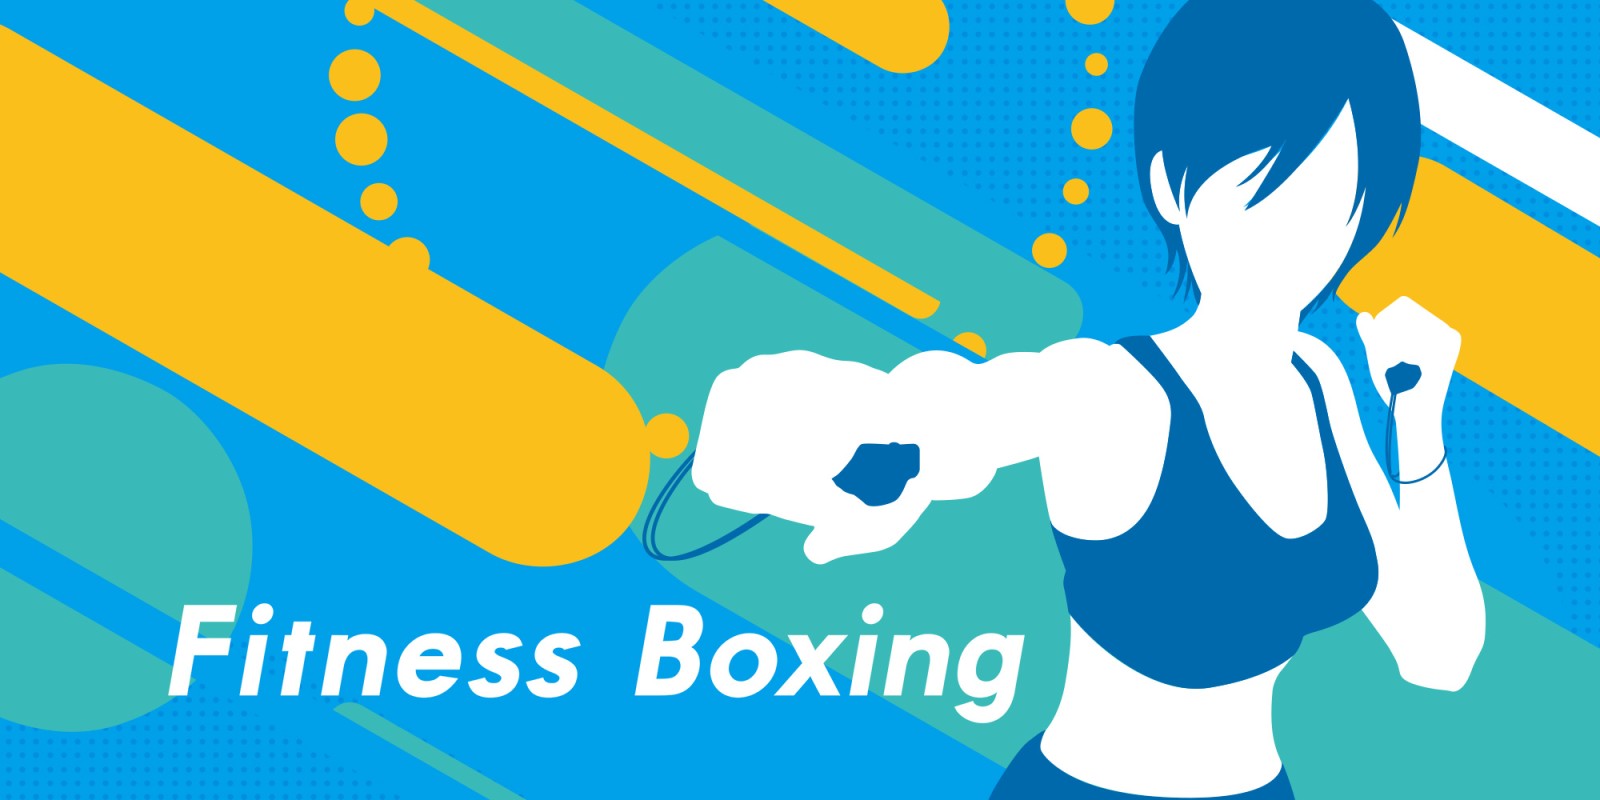 Absorbent Pearly throw dust in eyes Fitness Boxing | Nintendo Switch games | Games | Nintendo